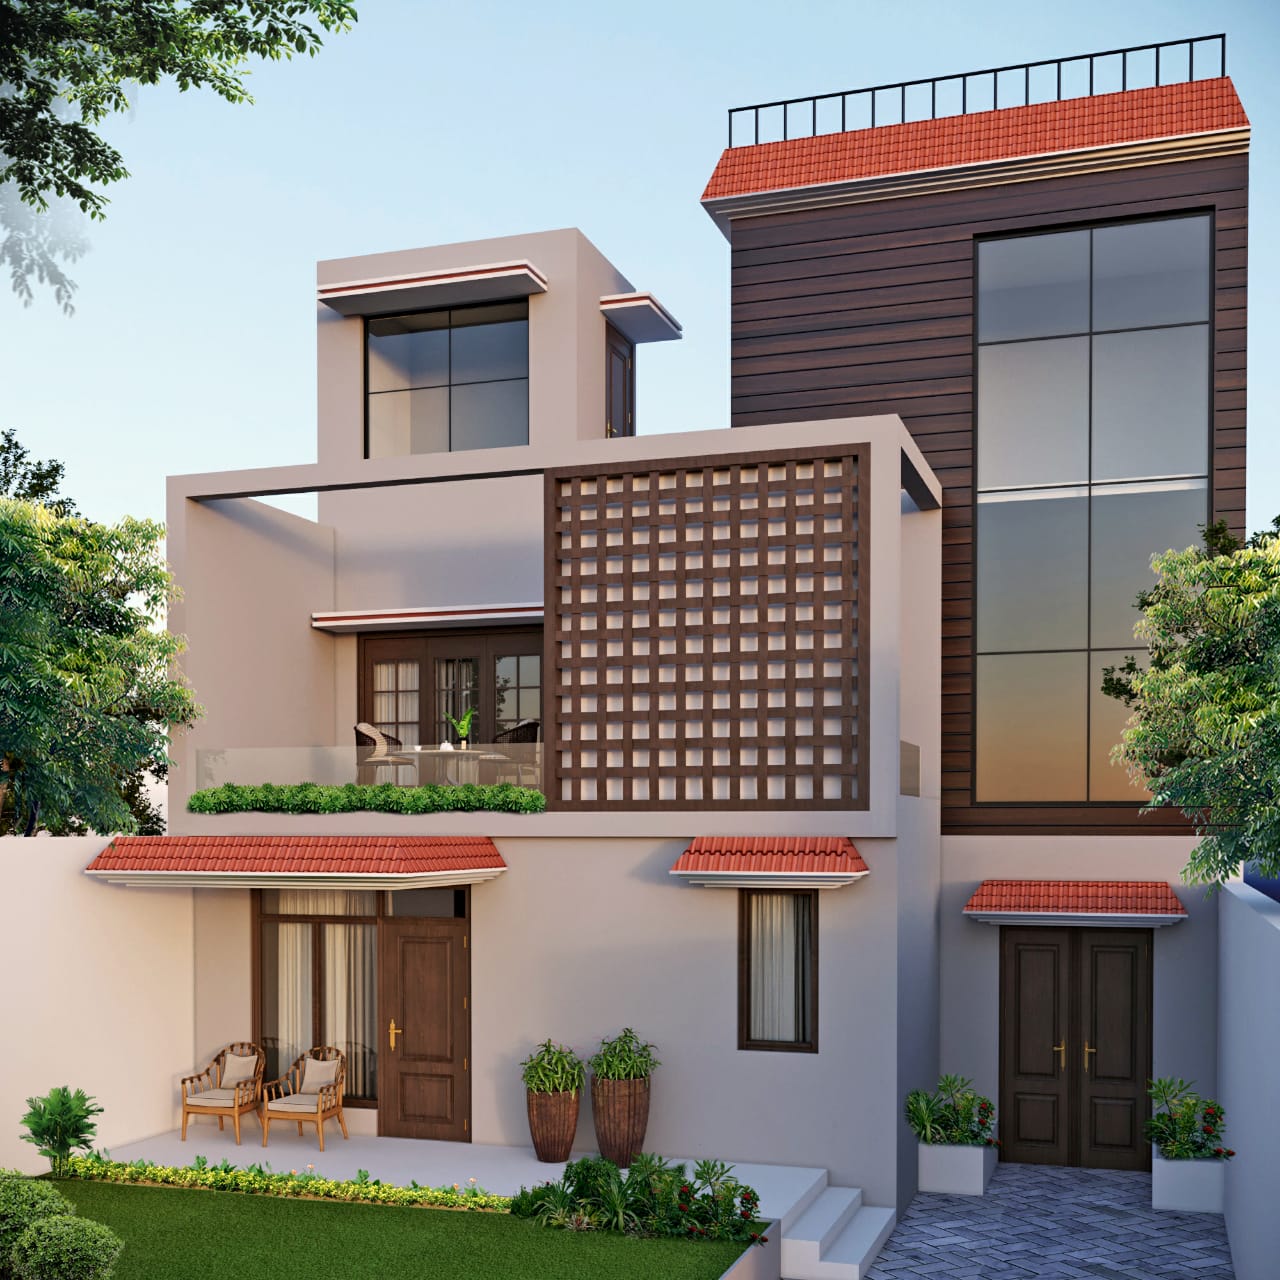 Landscaping Design With Facade